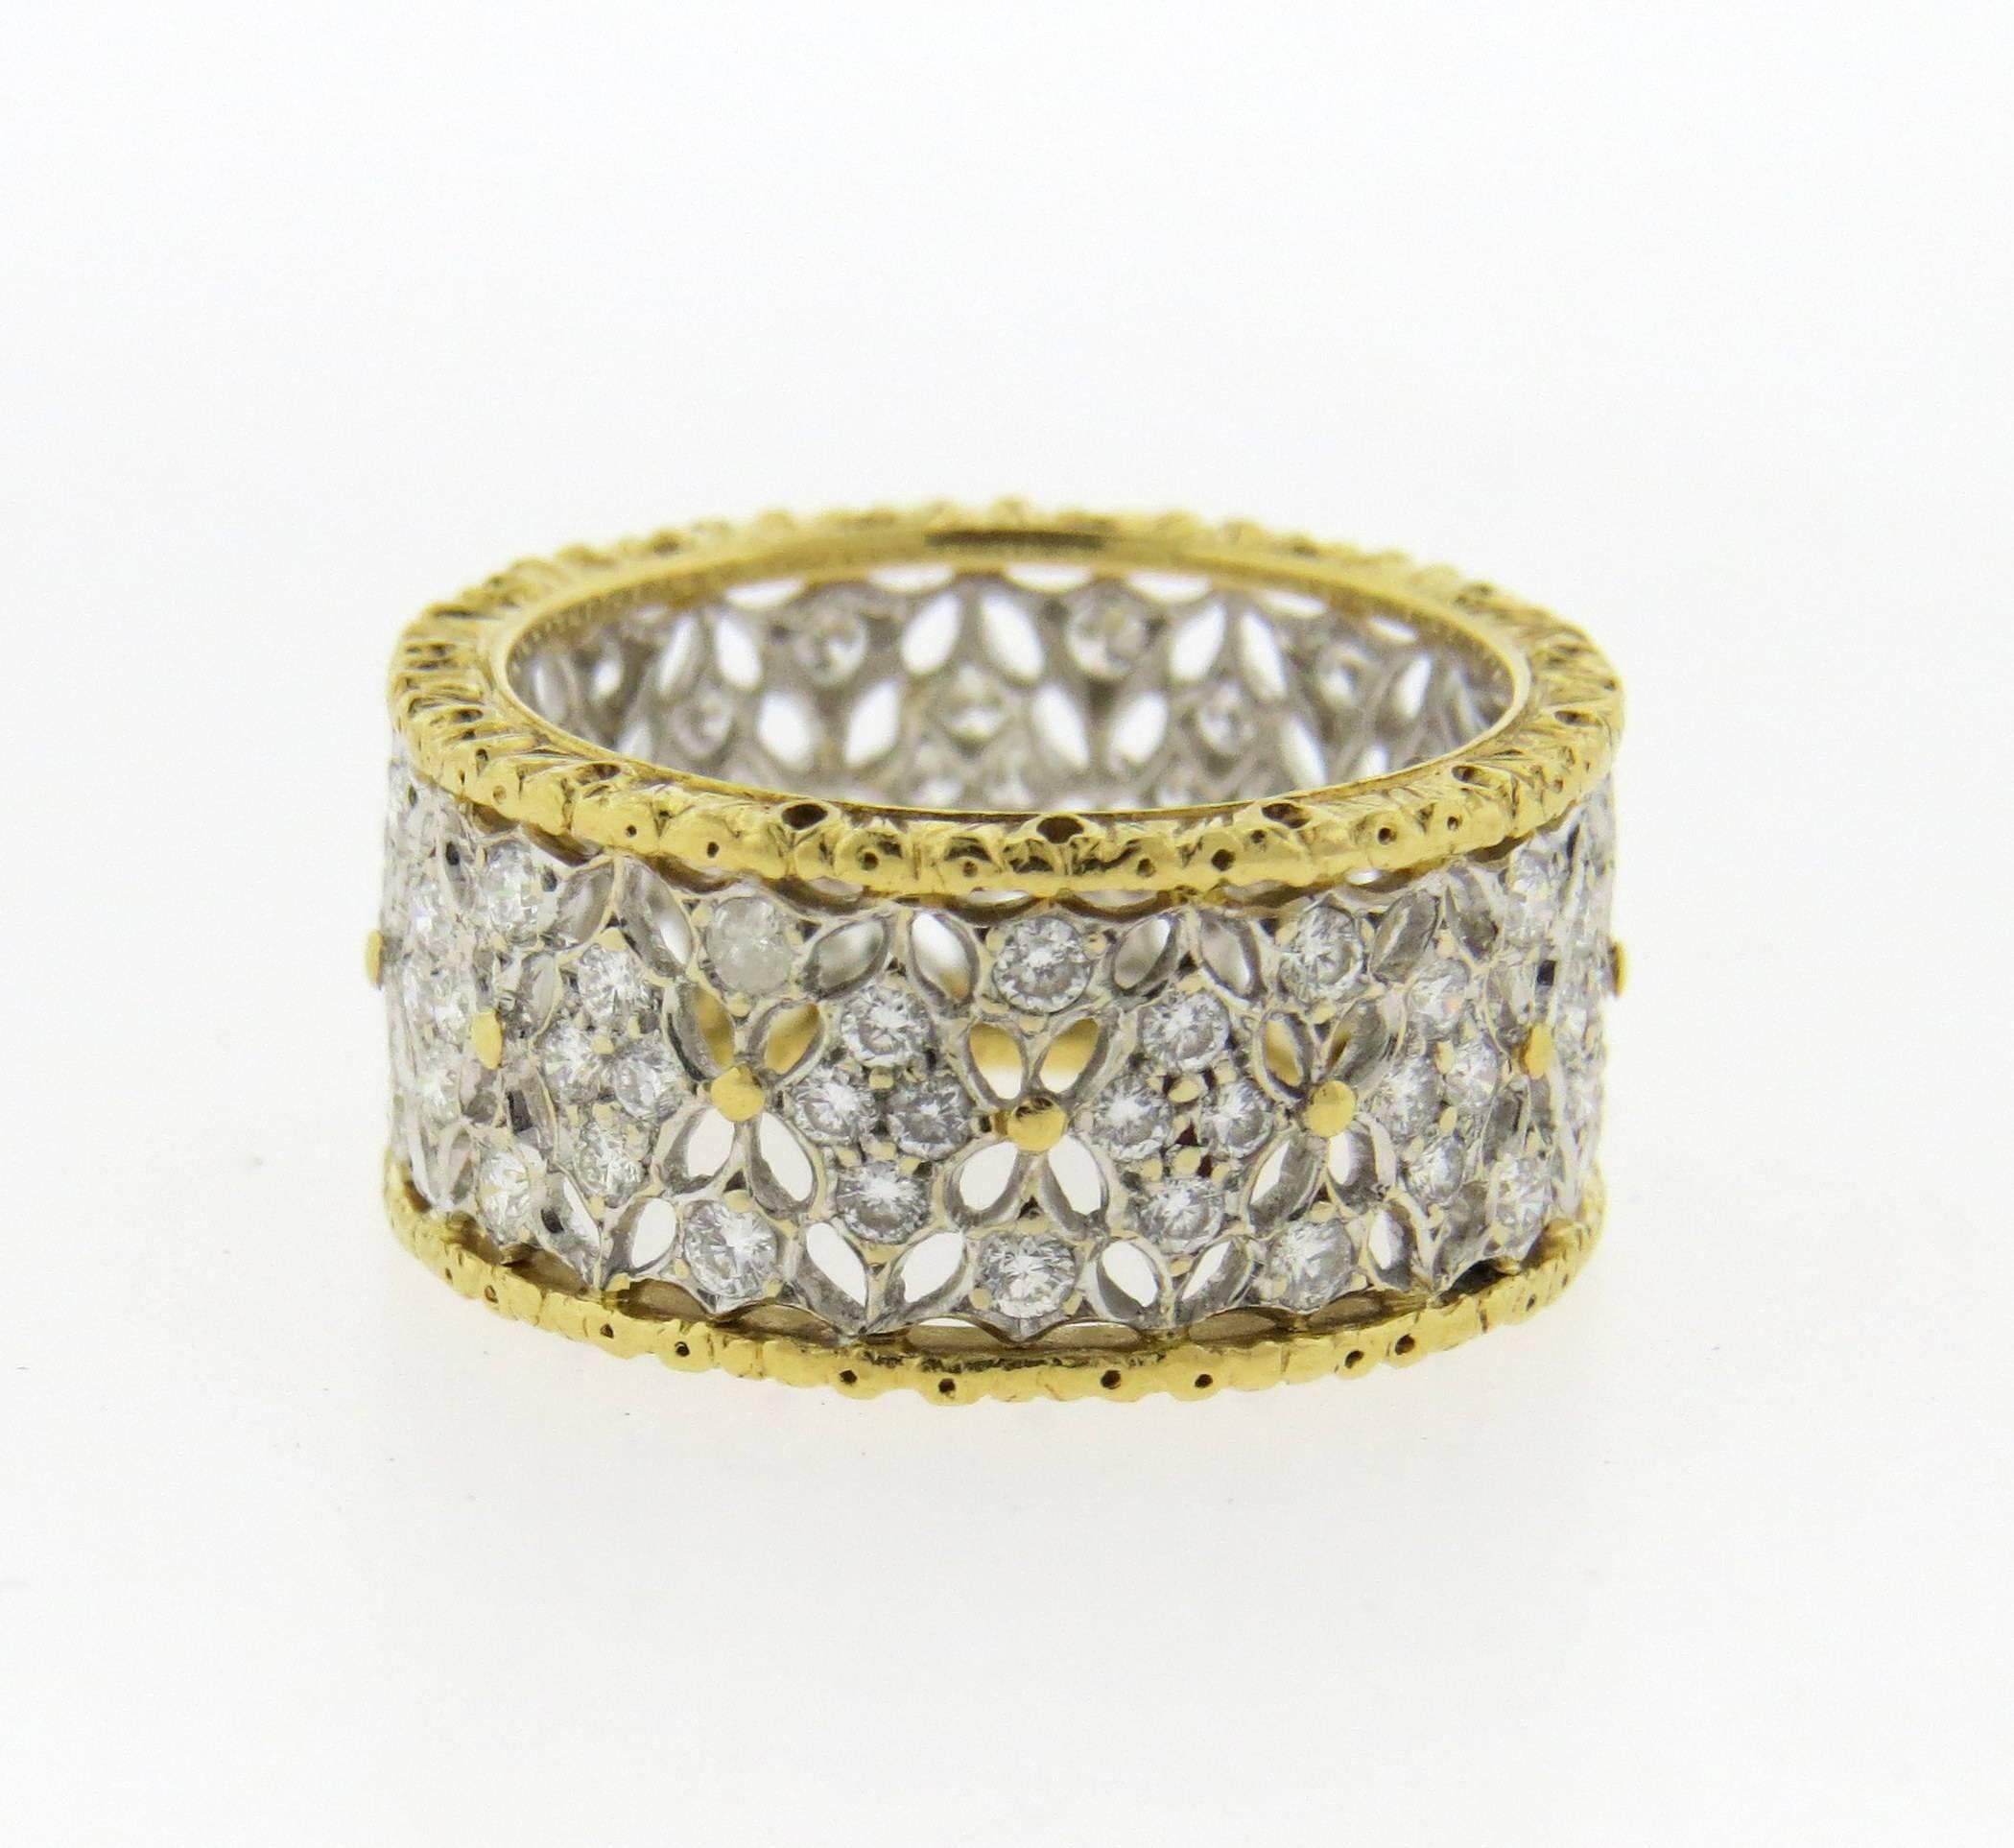 An 18k white and yellow gold band ring set with approximately 0.55ctw of H/VS diamonds.  The ring is a size 6.5 and 8.9mm wide.  The weight of the piece is 5.1 grams.  Marked: Buccellati, Italy, 18k.